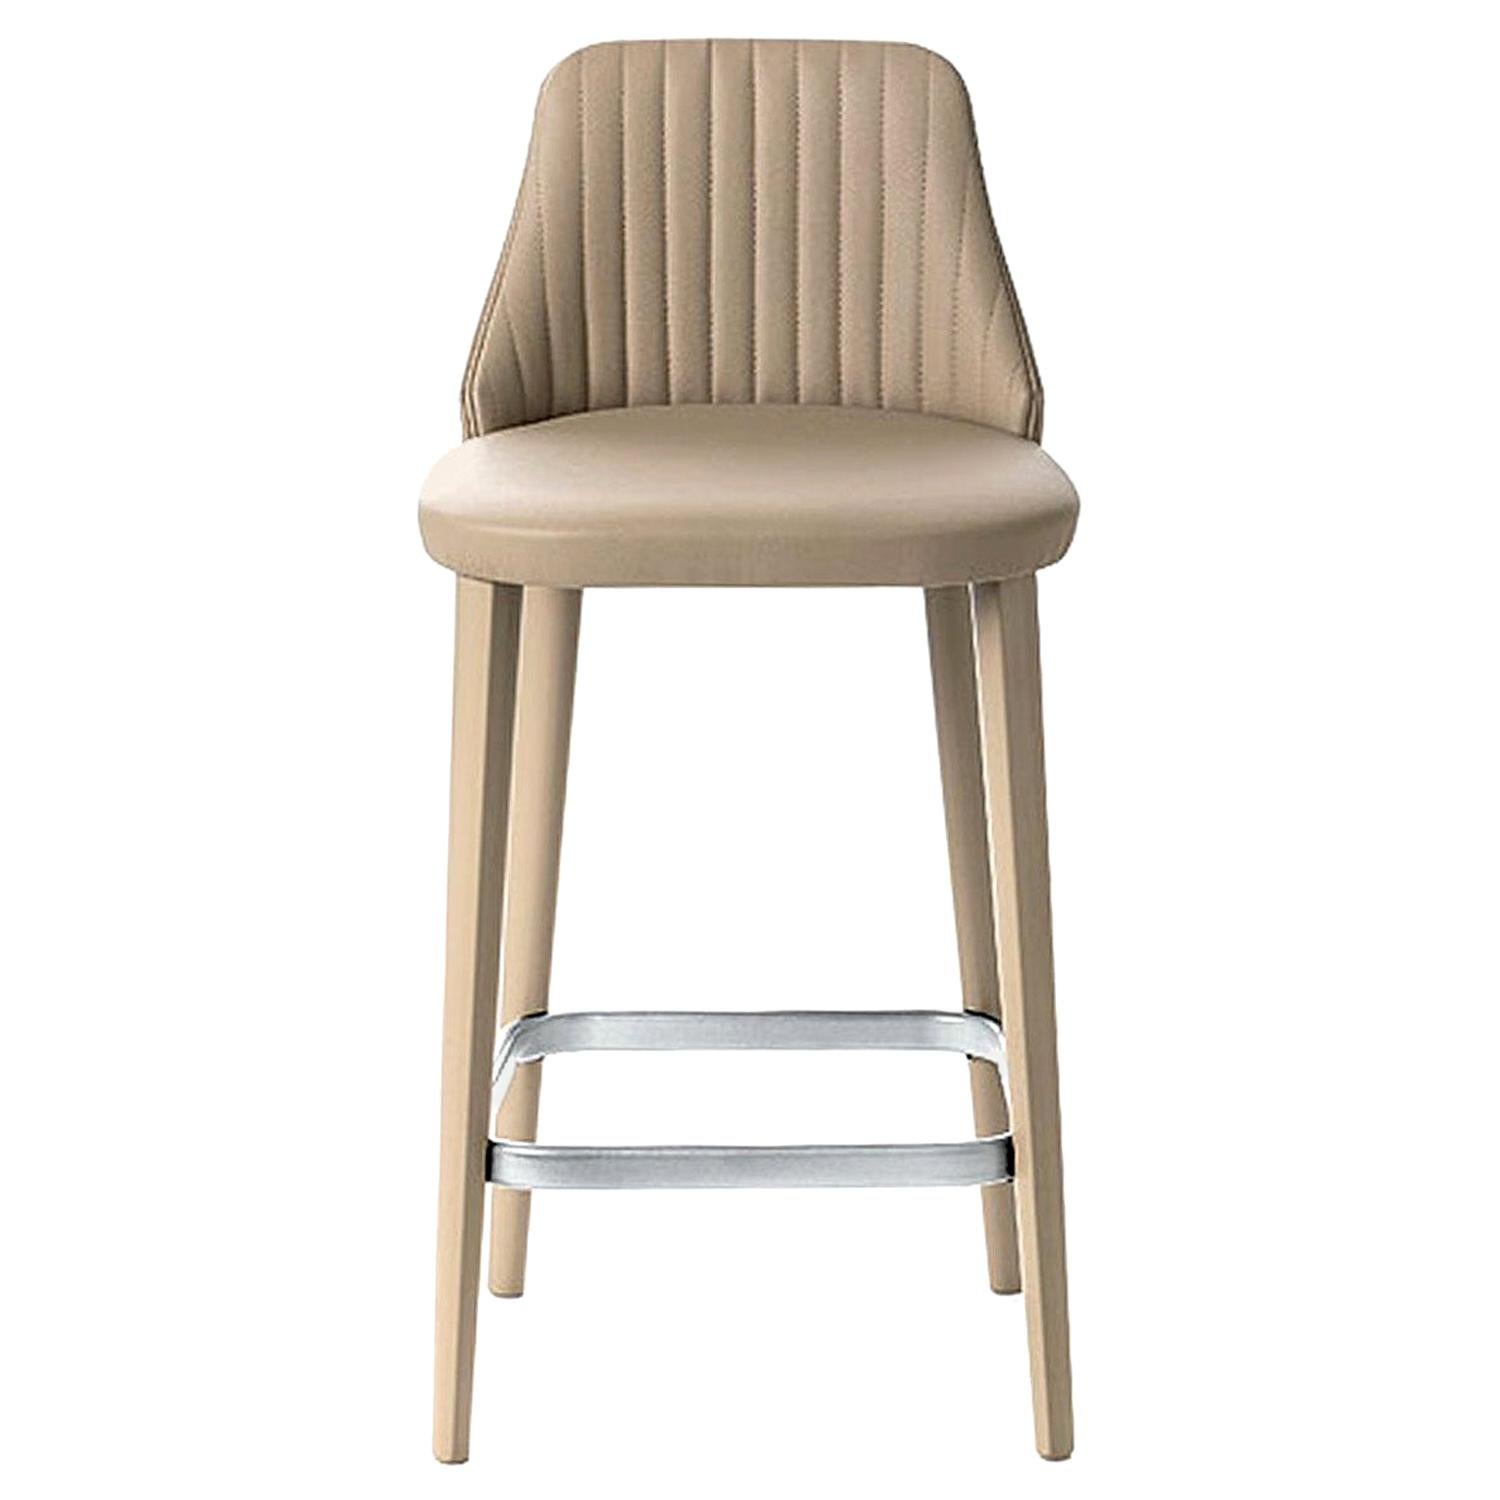 Brown Leather Break Bar Stool, Designed by Enzo Berti, Made in Italy